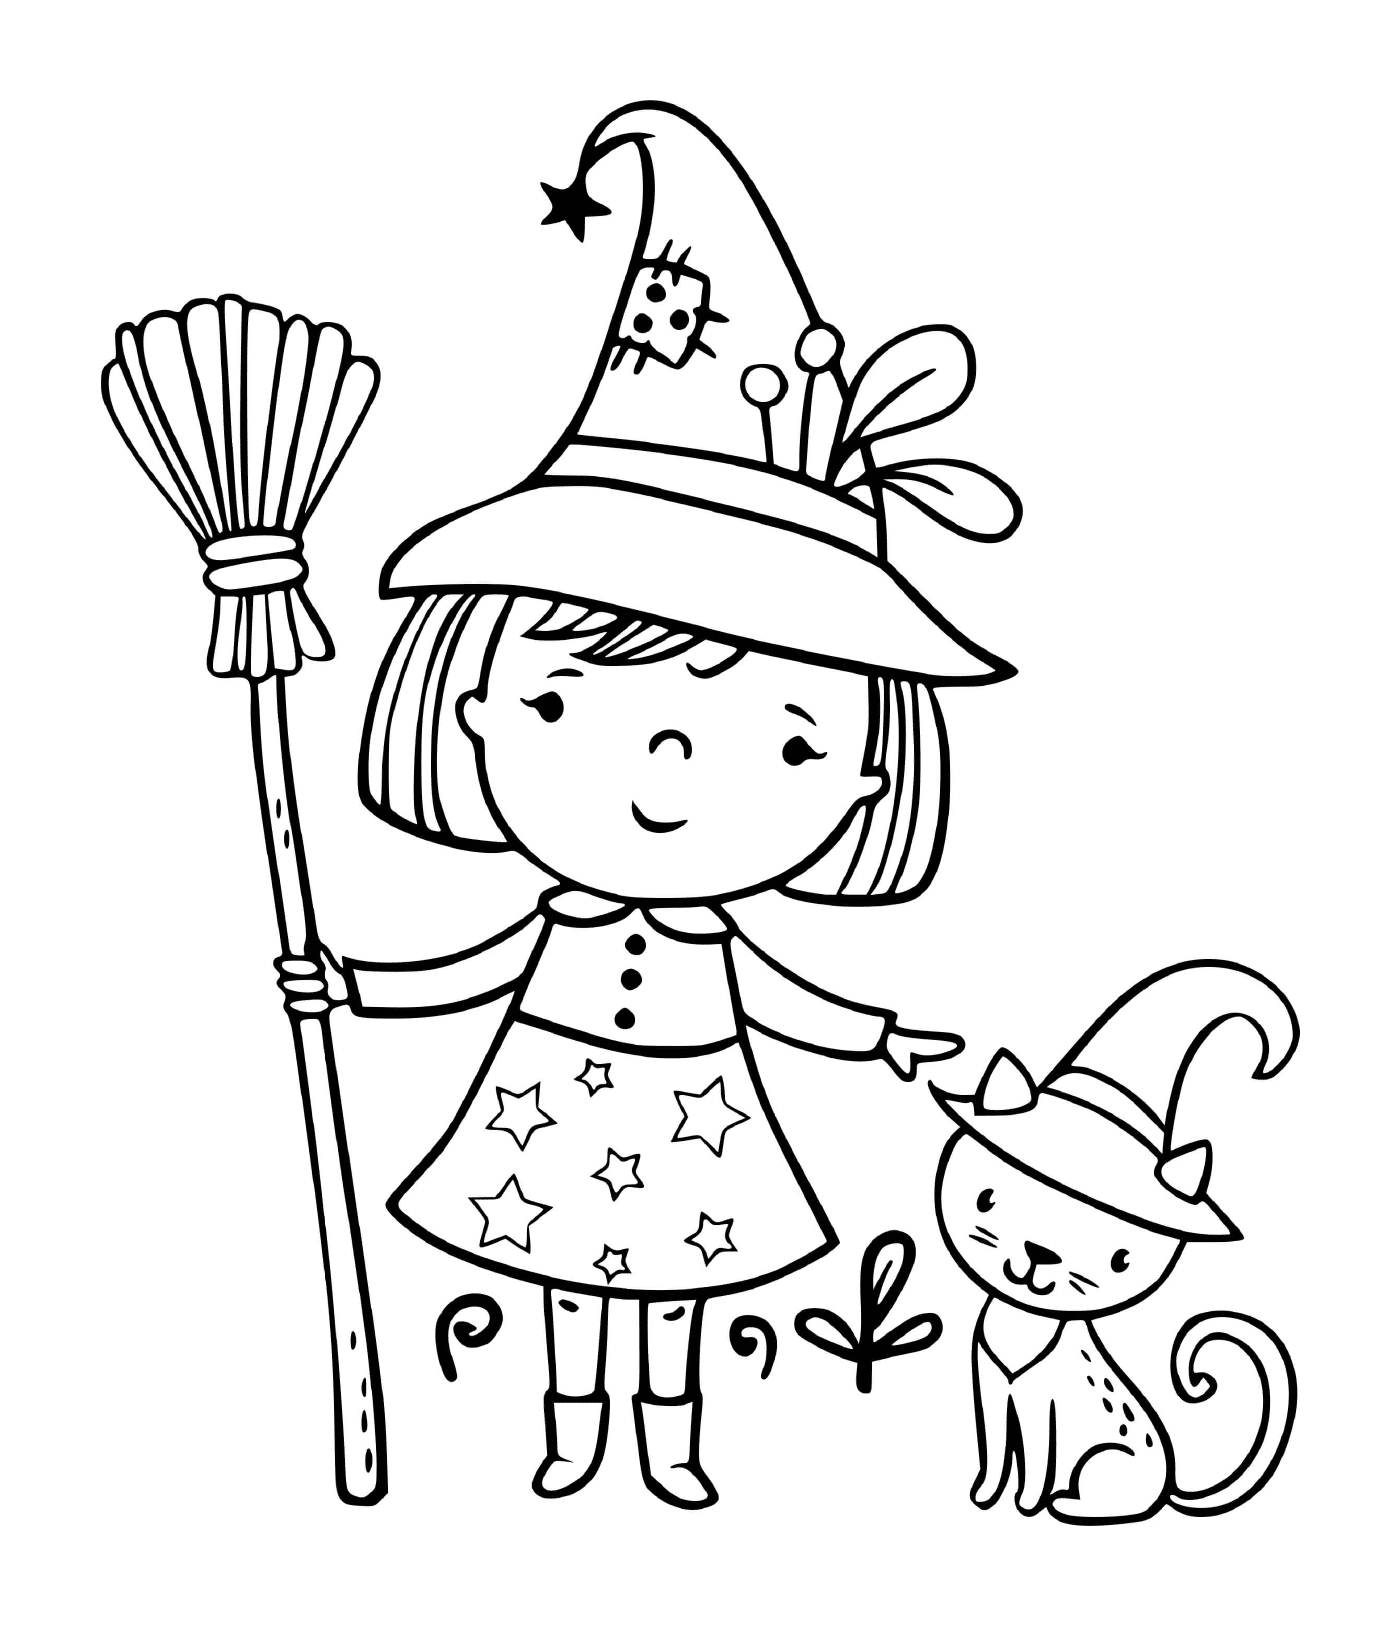  Little witch with her black cat 